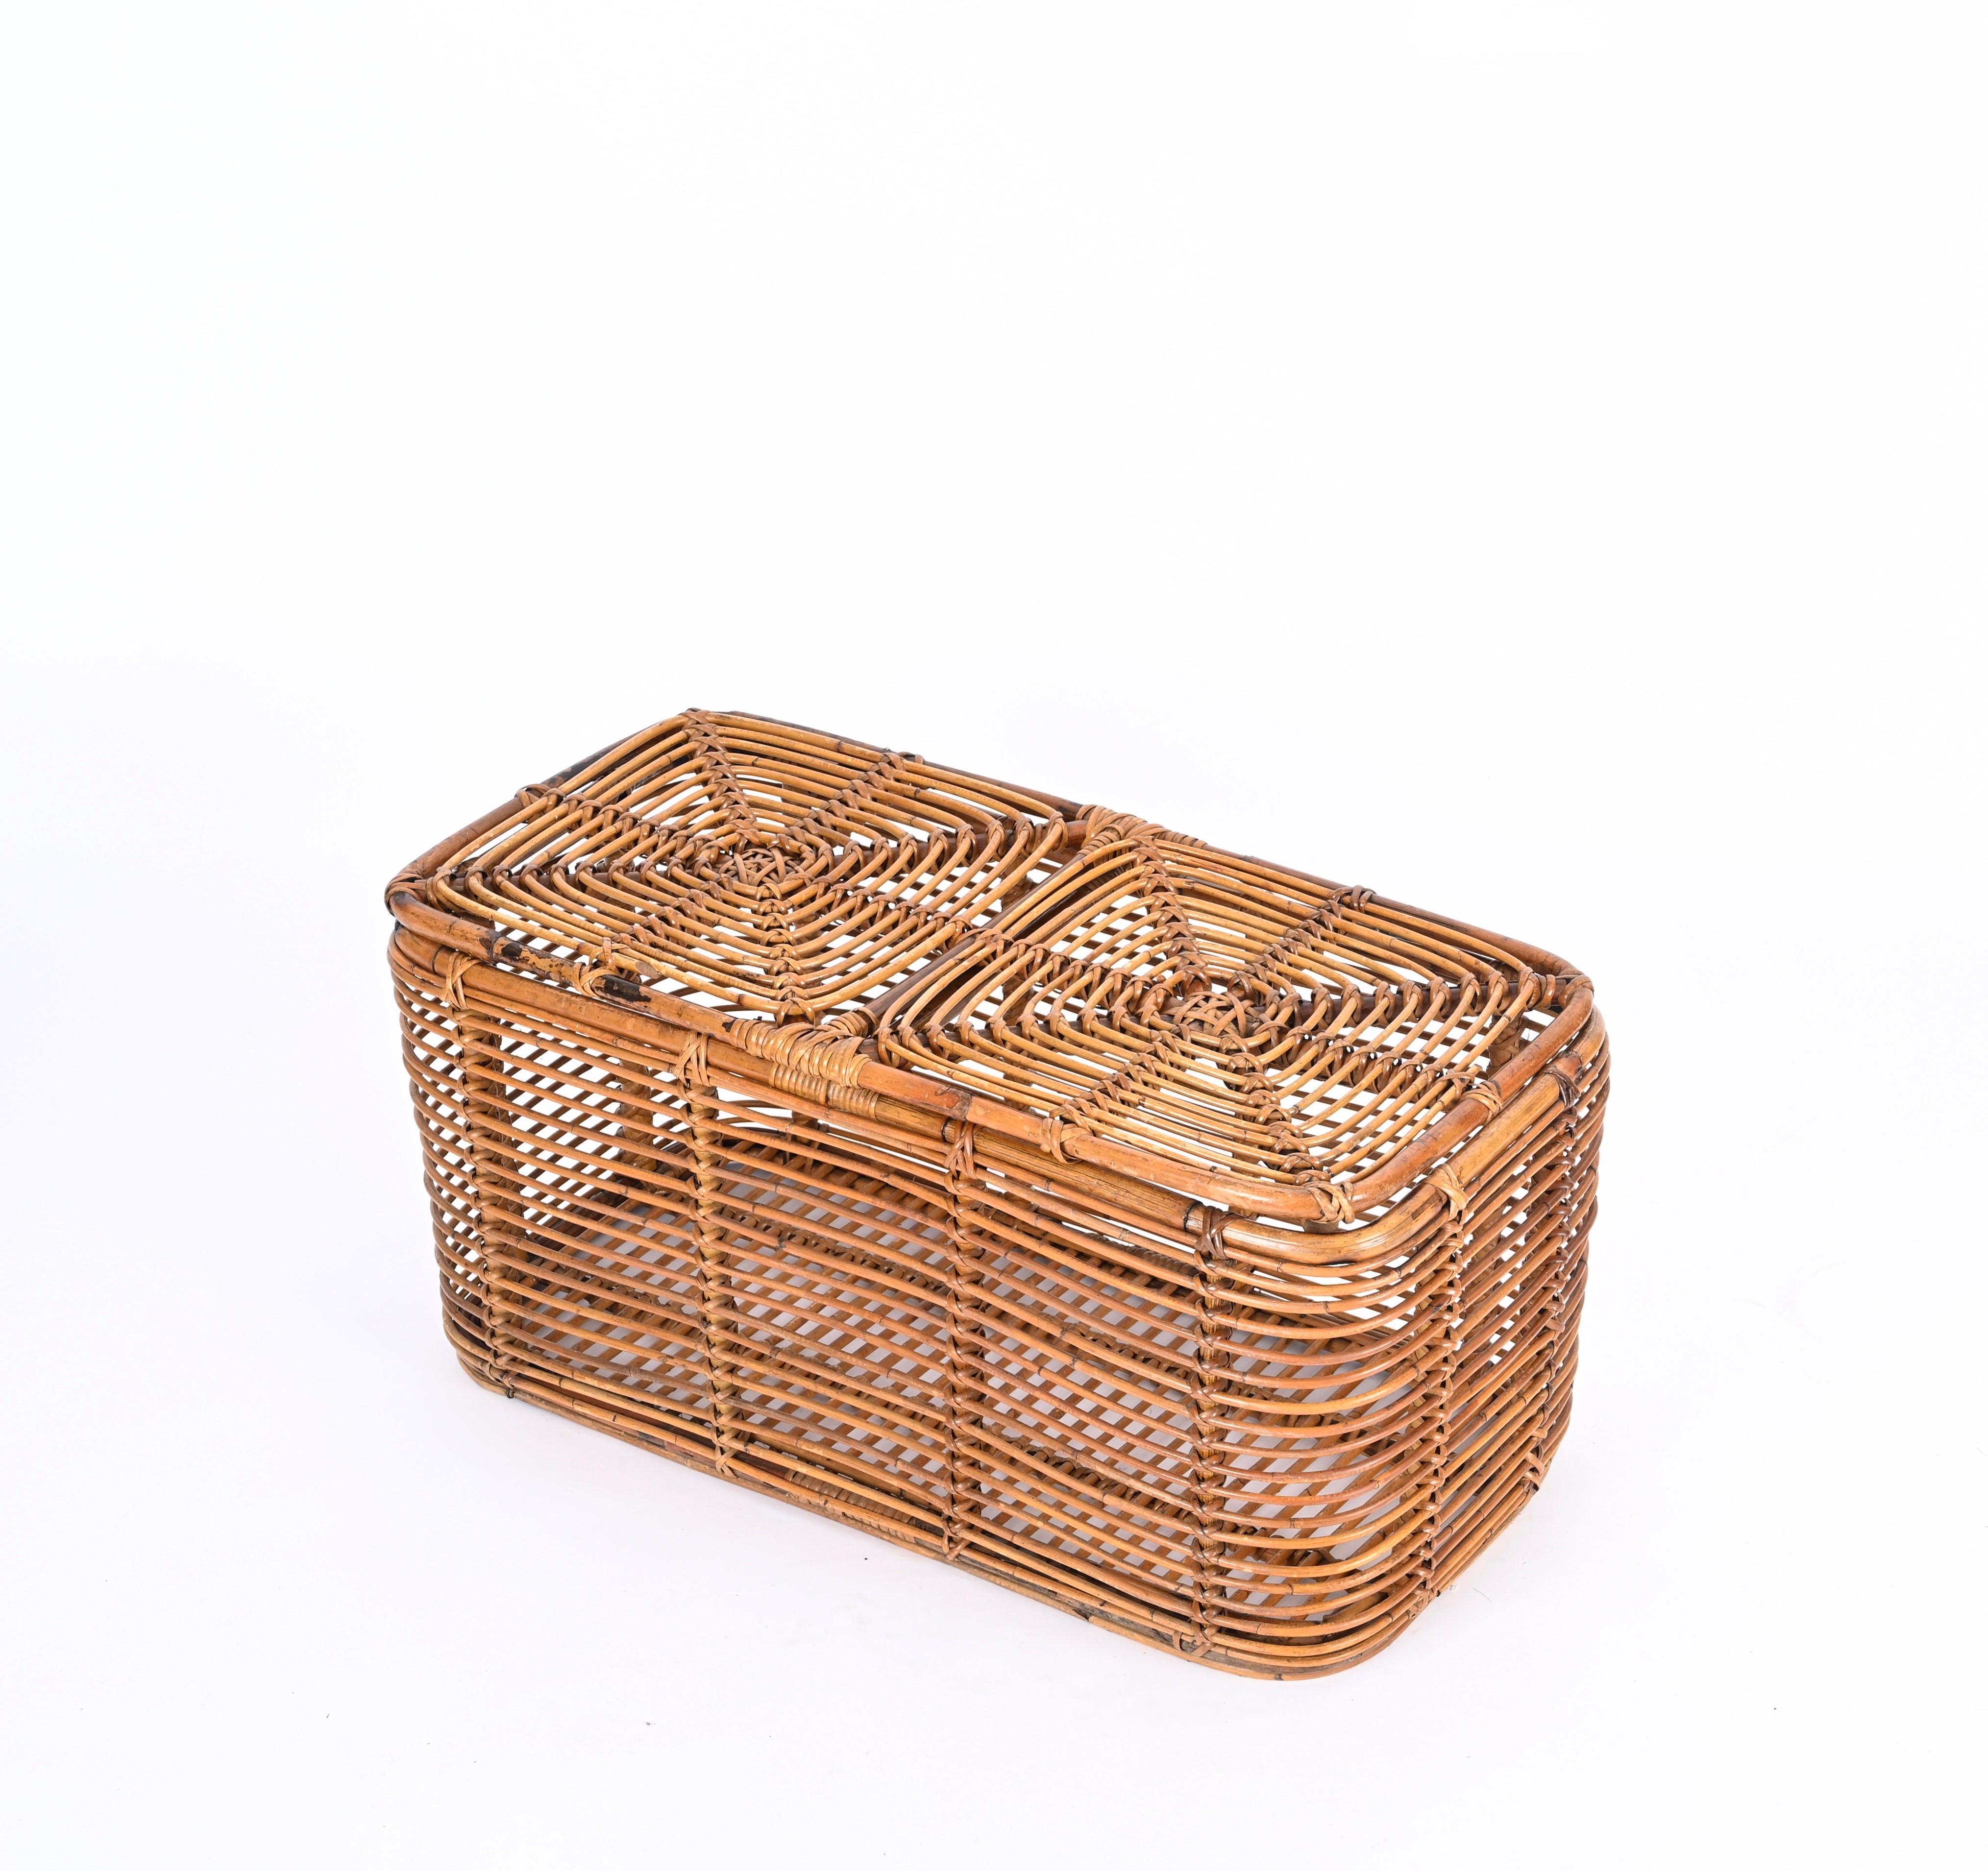 Midcentury French Riviera Bamboo and Woven Rattan Italian Basket, 1960s For Sale 10